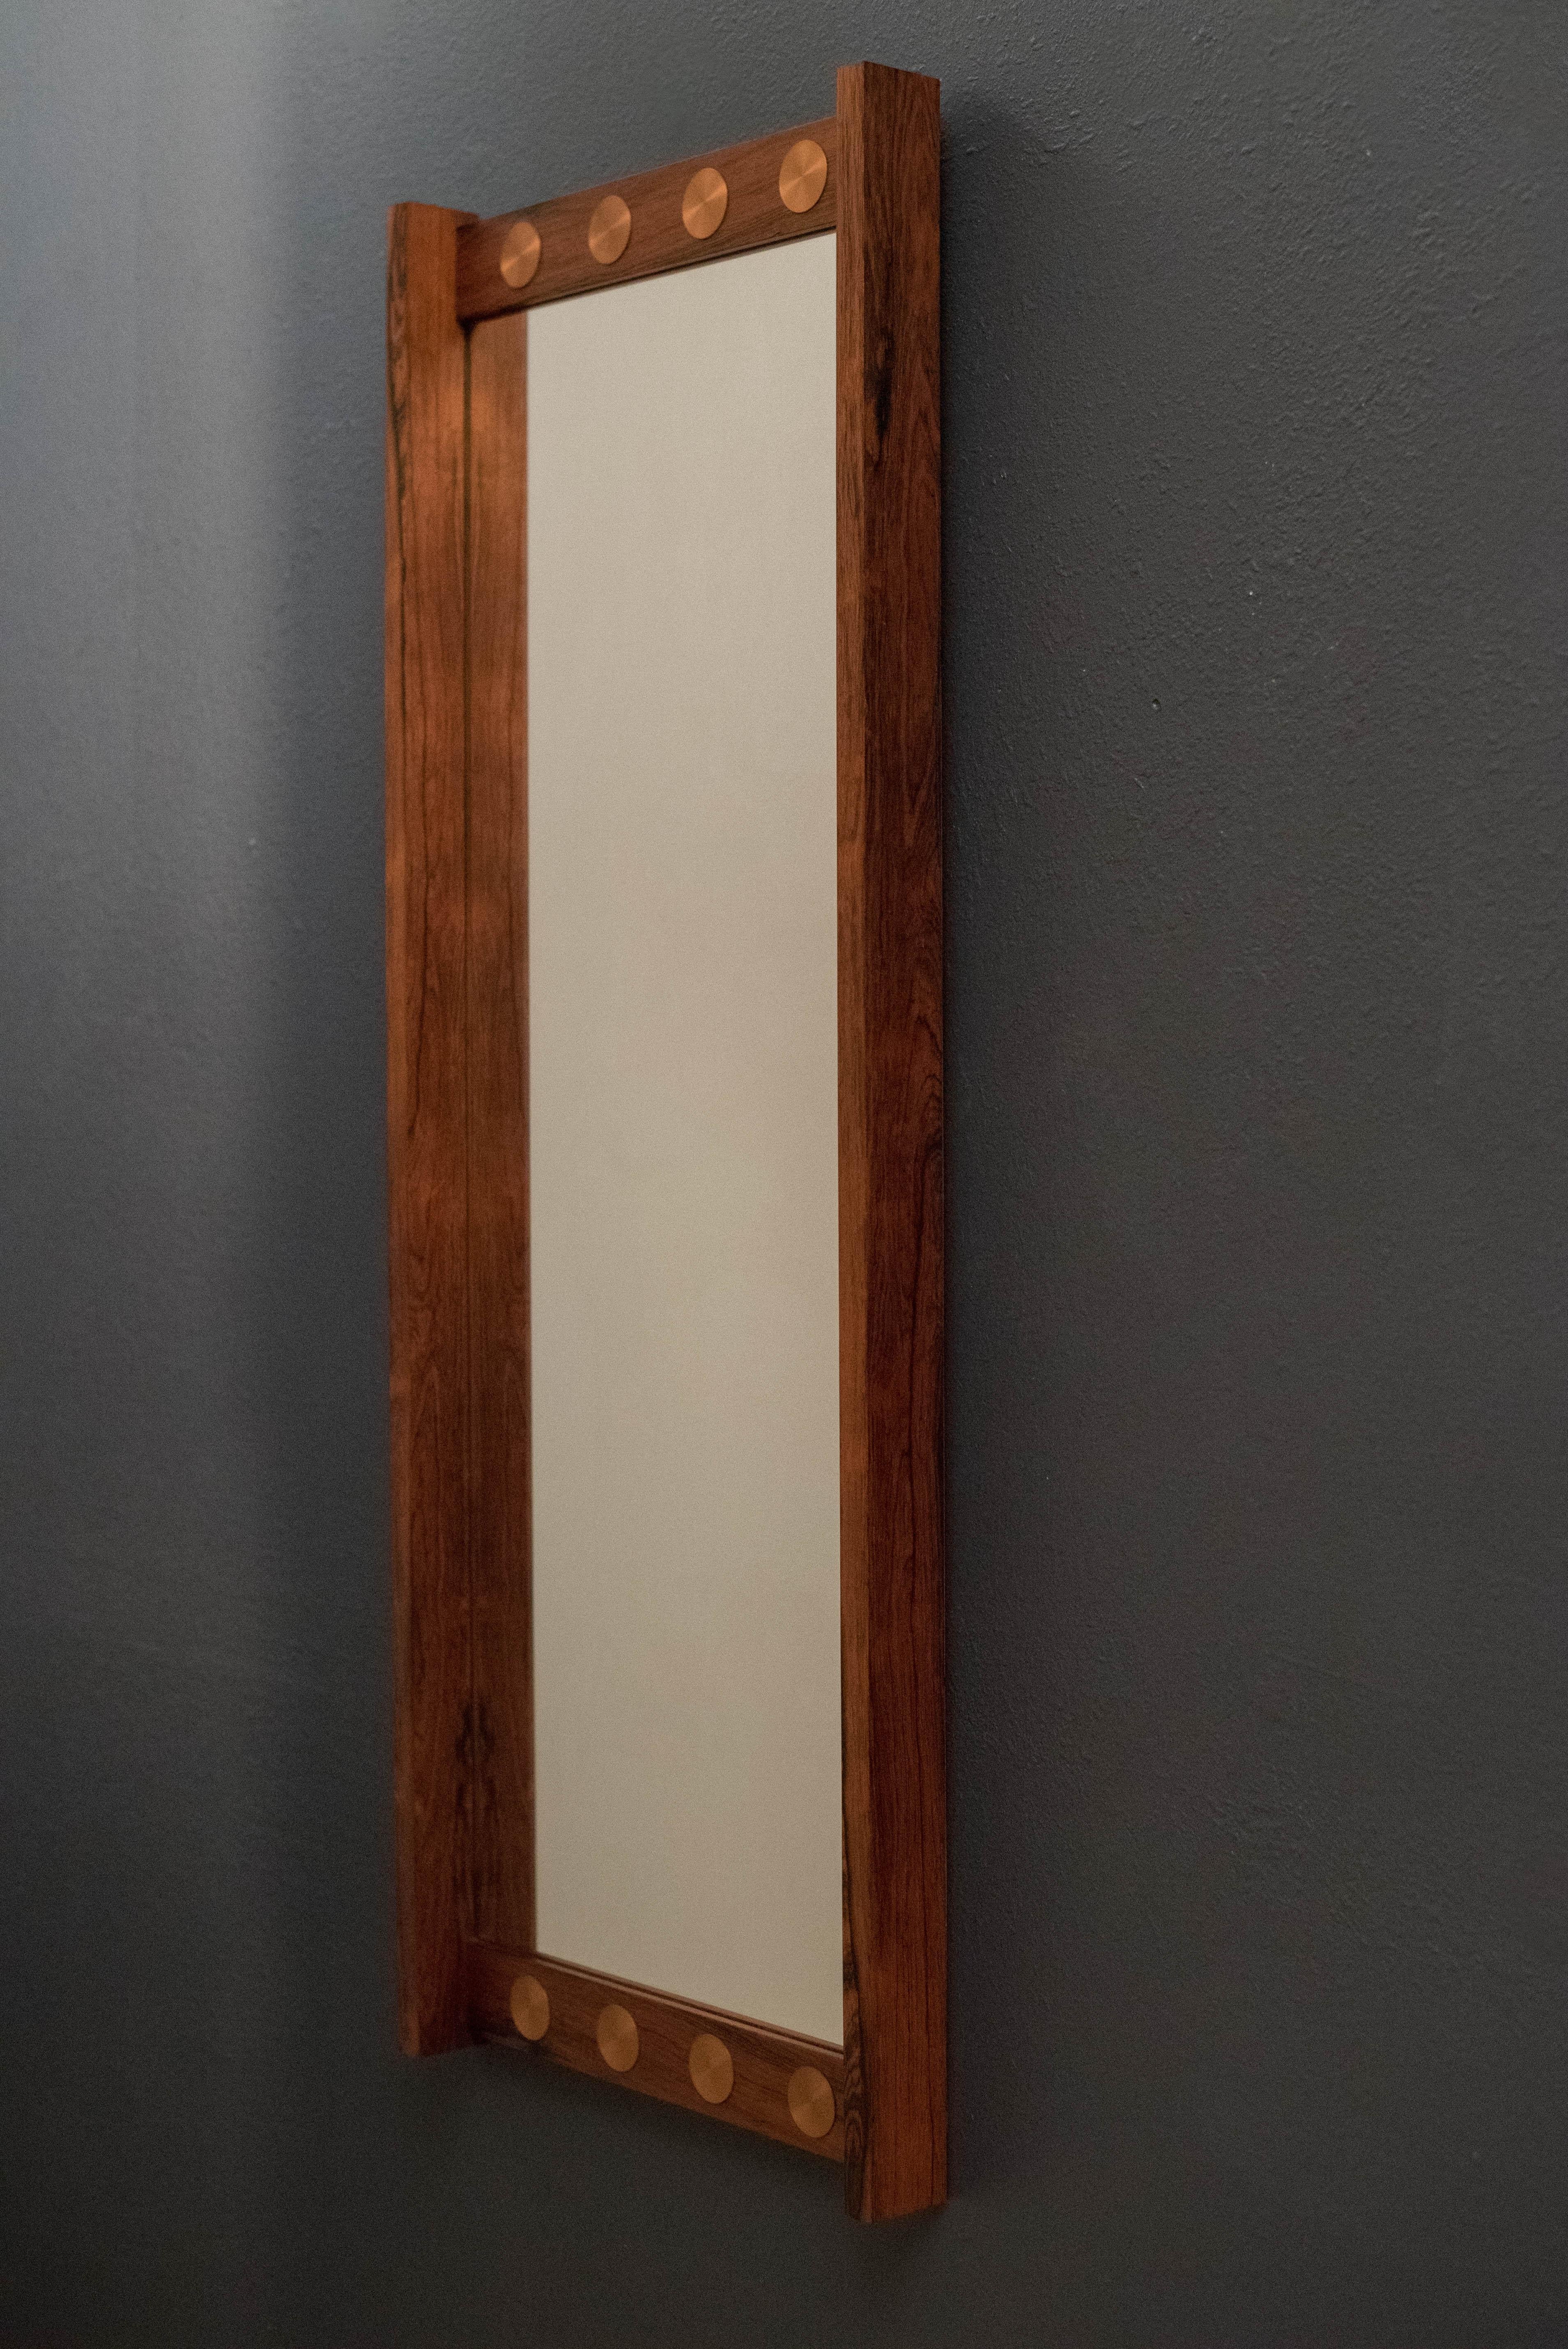 Vintage wall mirror marked G & T, AB Glas and Trä of Sweden. This piece features round copper accents and is framed in rosewood veneer.